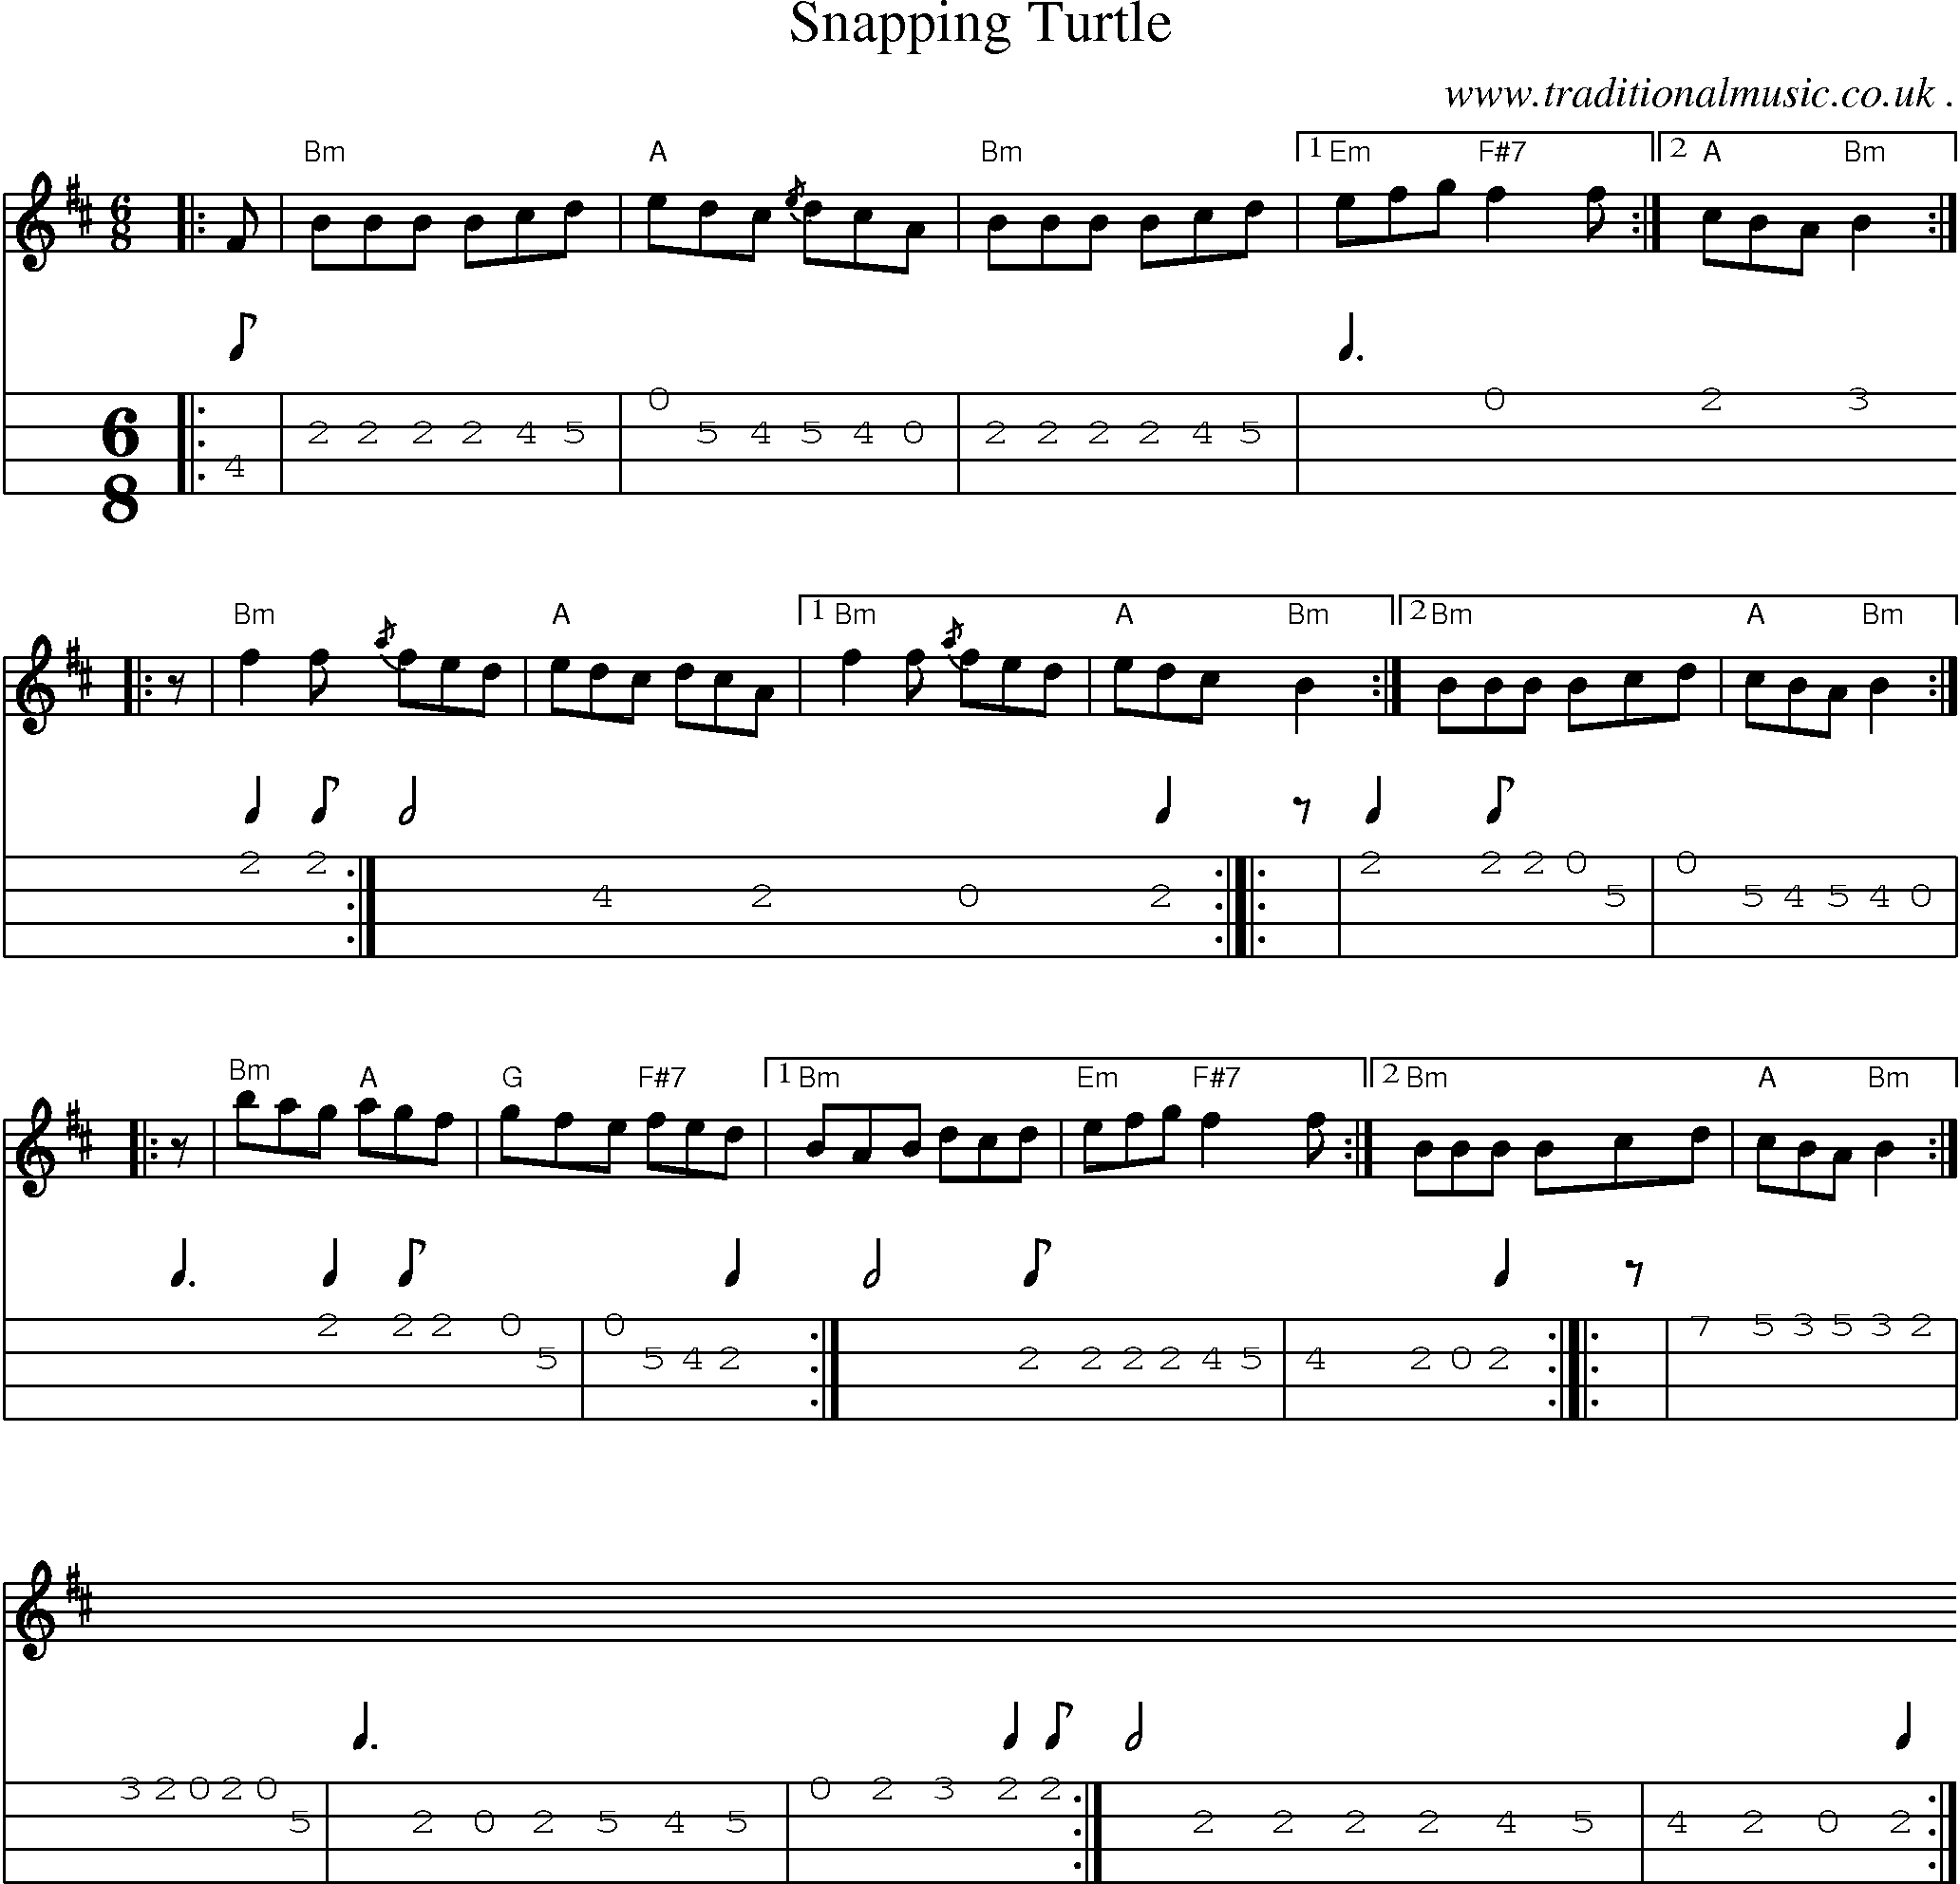 Sheet-music  score, Chords and Mandolin Tabs for Snapping Turtle